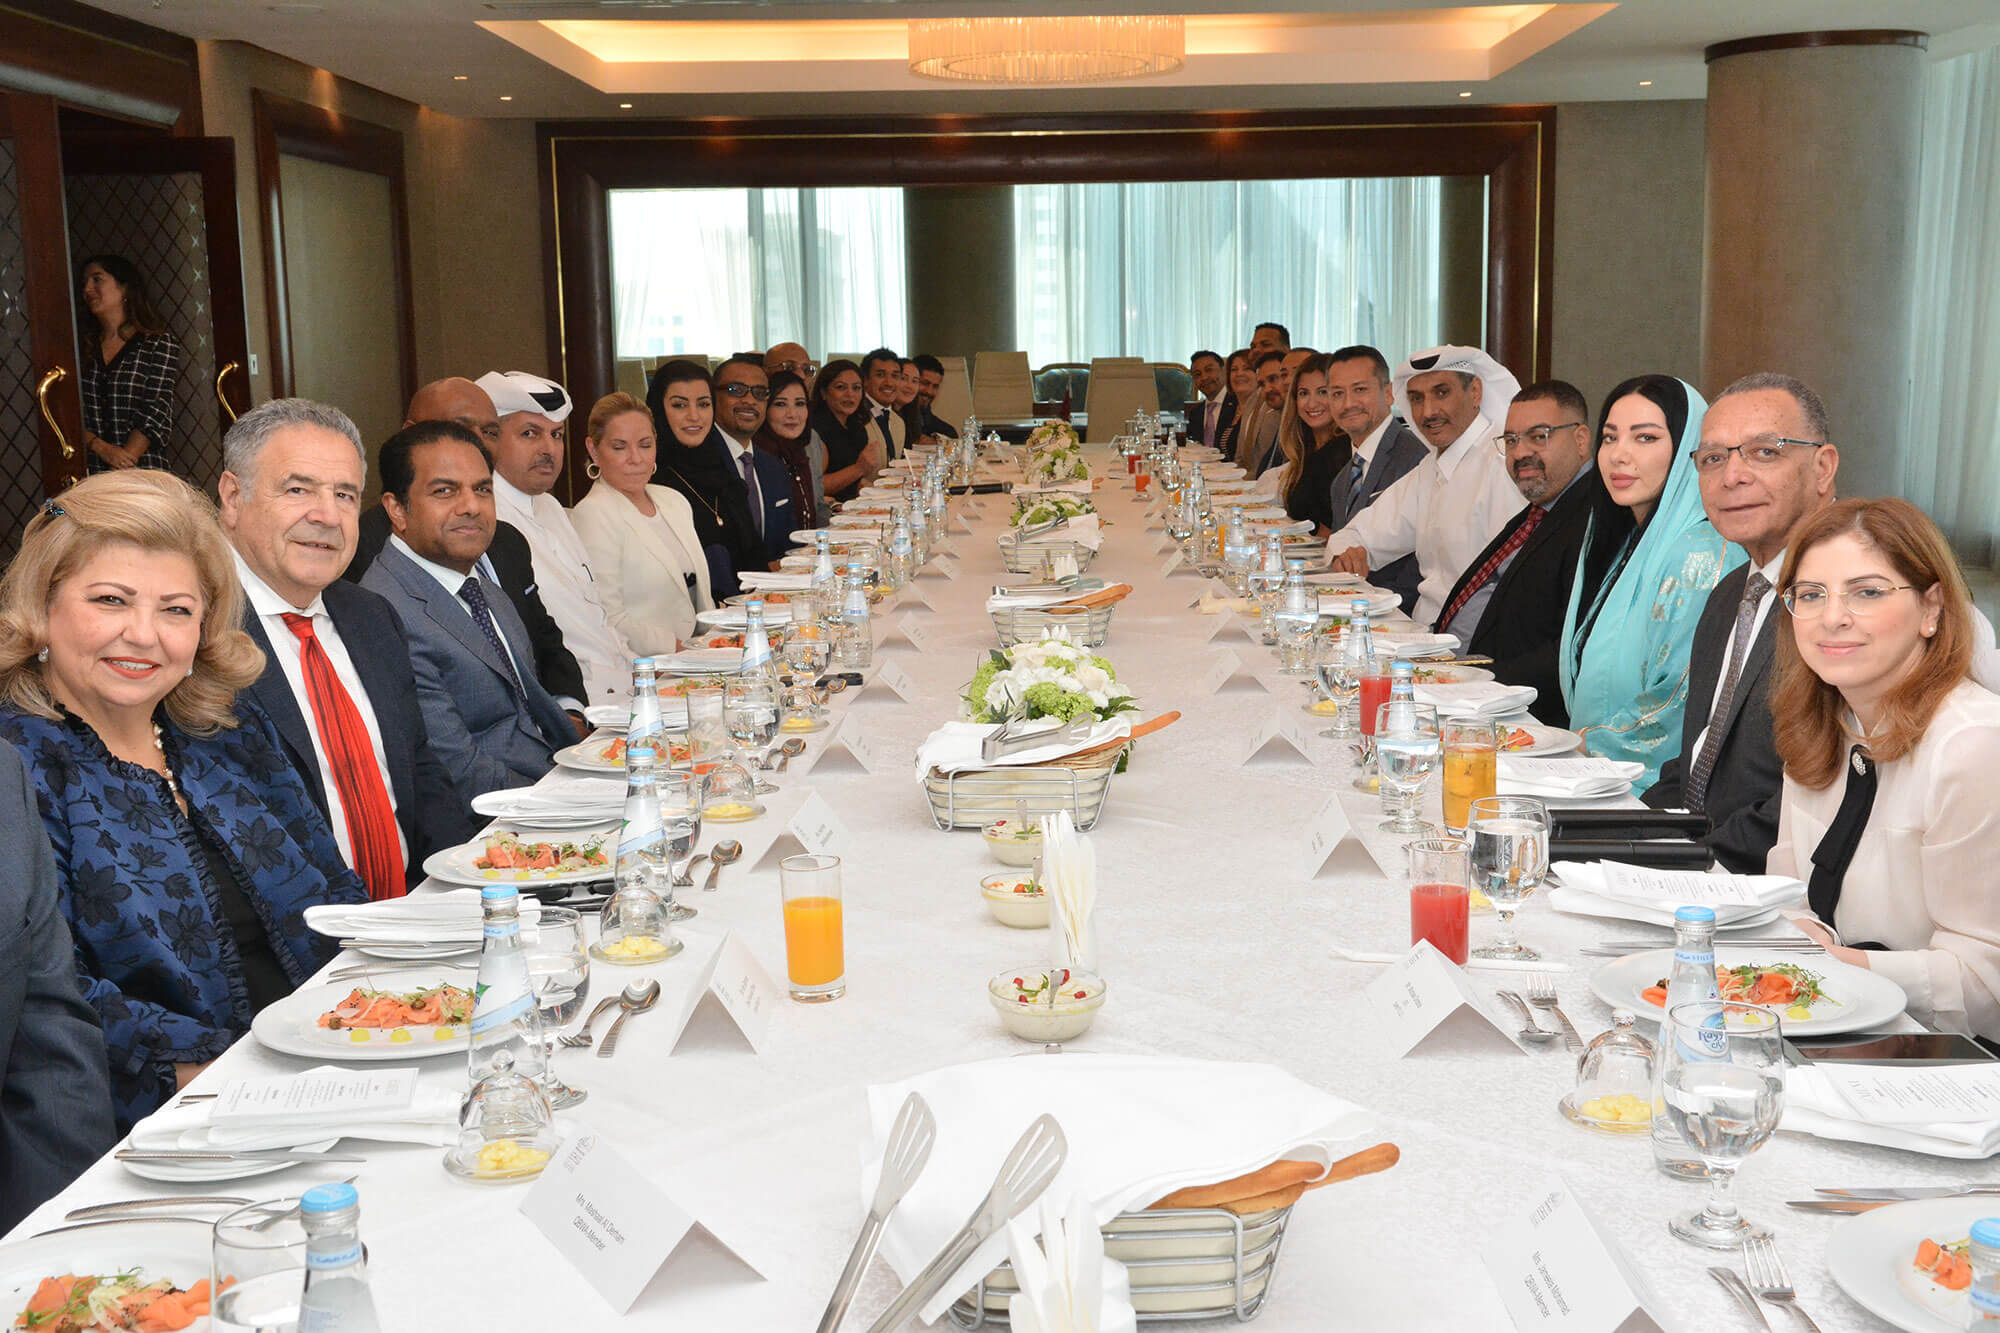 The Qatari Businessmen Association organized a luncheon in honor of the greater Washington Hispanic Chamber of Commerce.